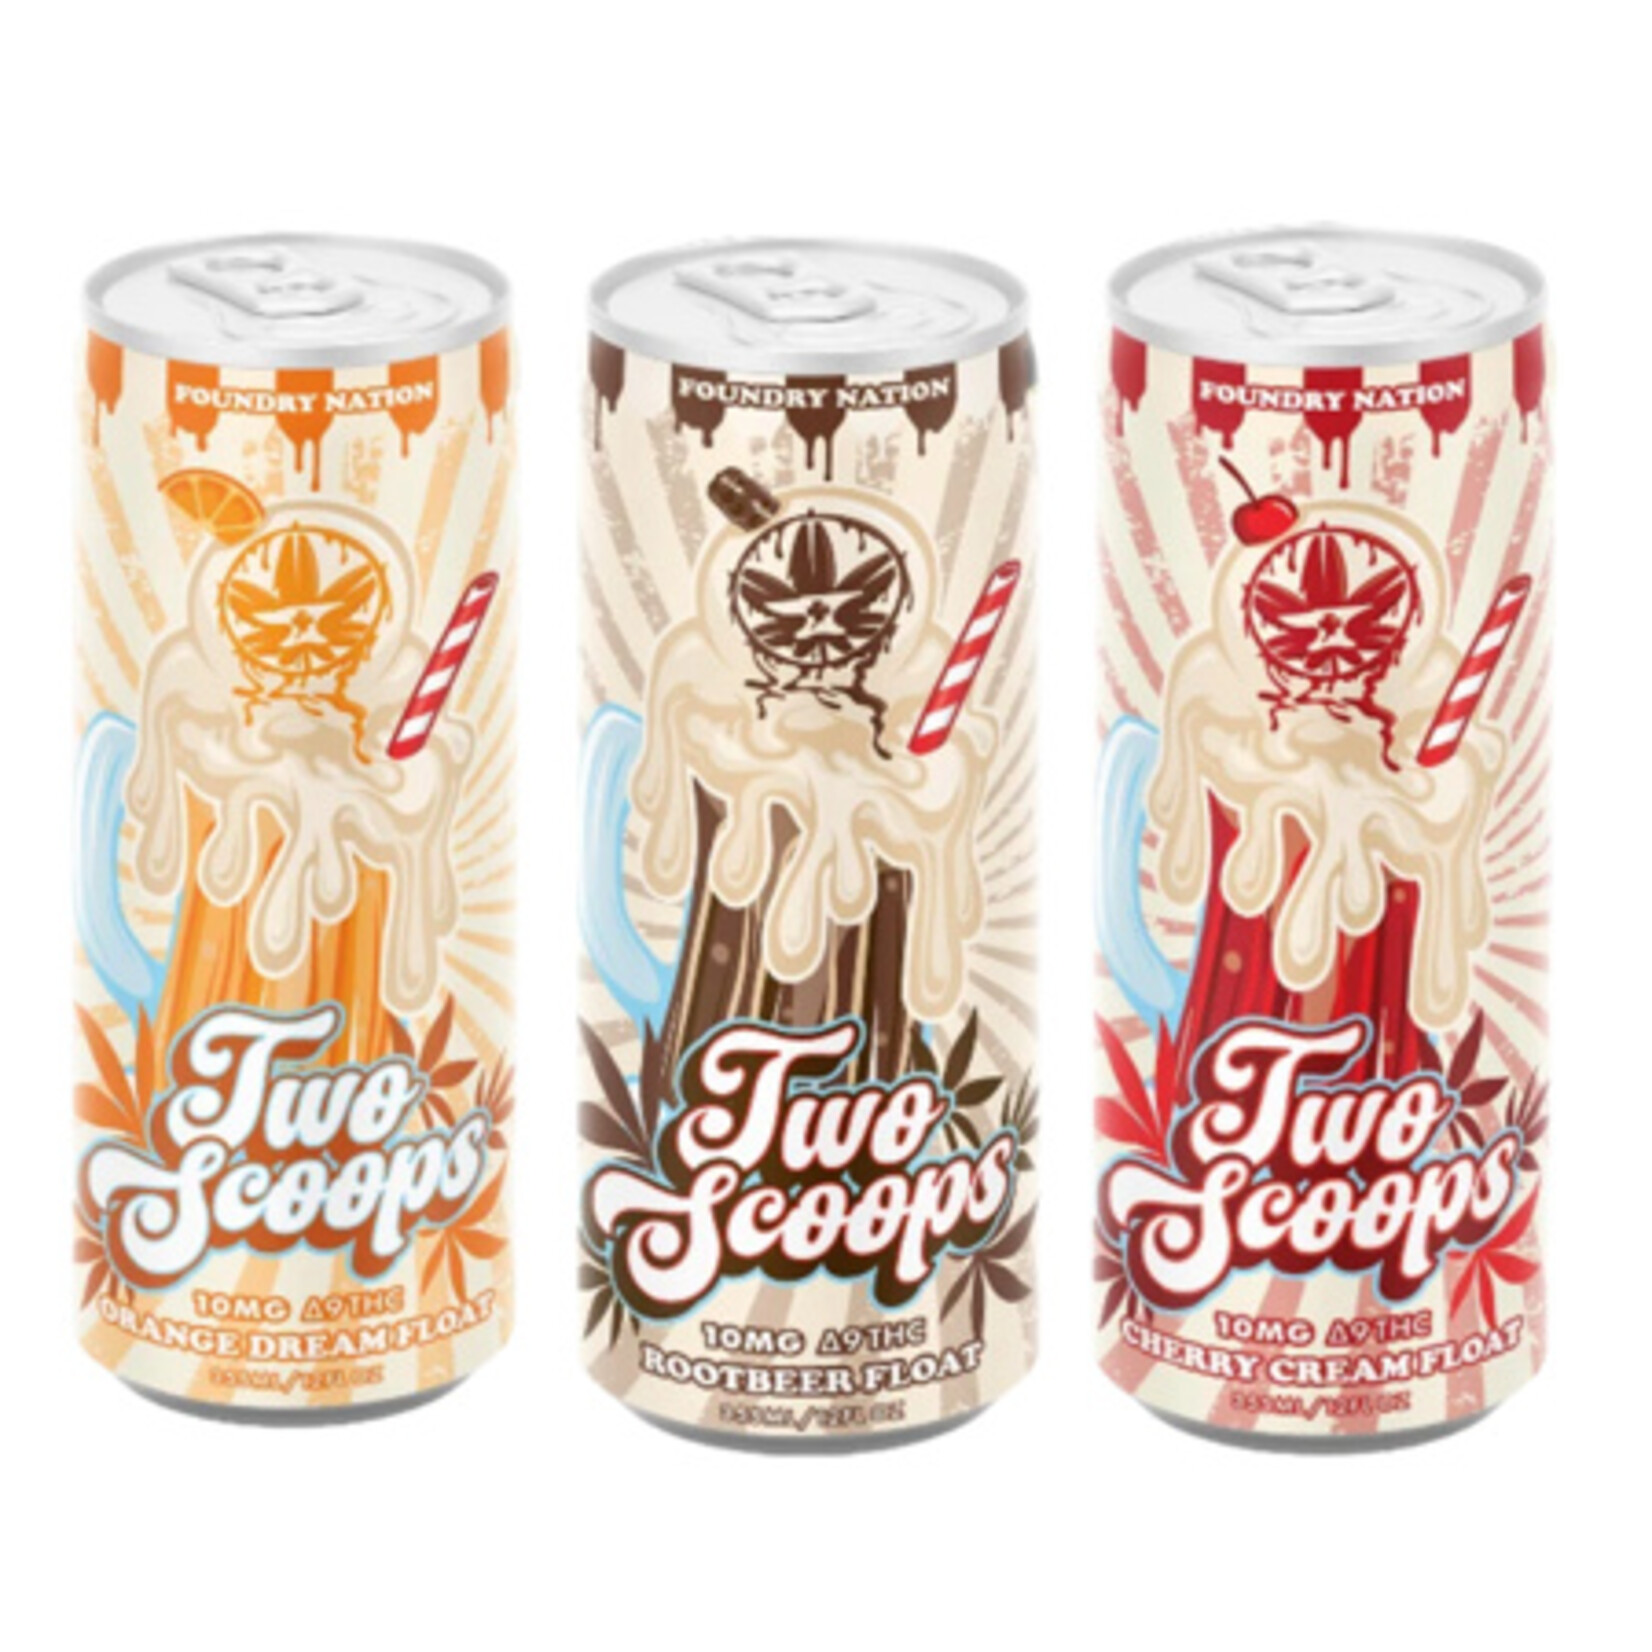 FOUNDRY NATION FOUNDRY NATION - TWO SCOOPS 12oz 10MG D9 SODA ROOT BEER FLOAT